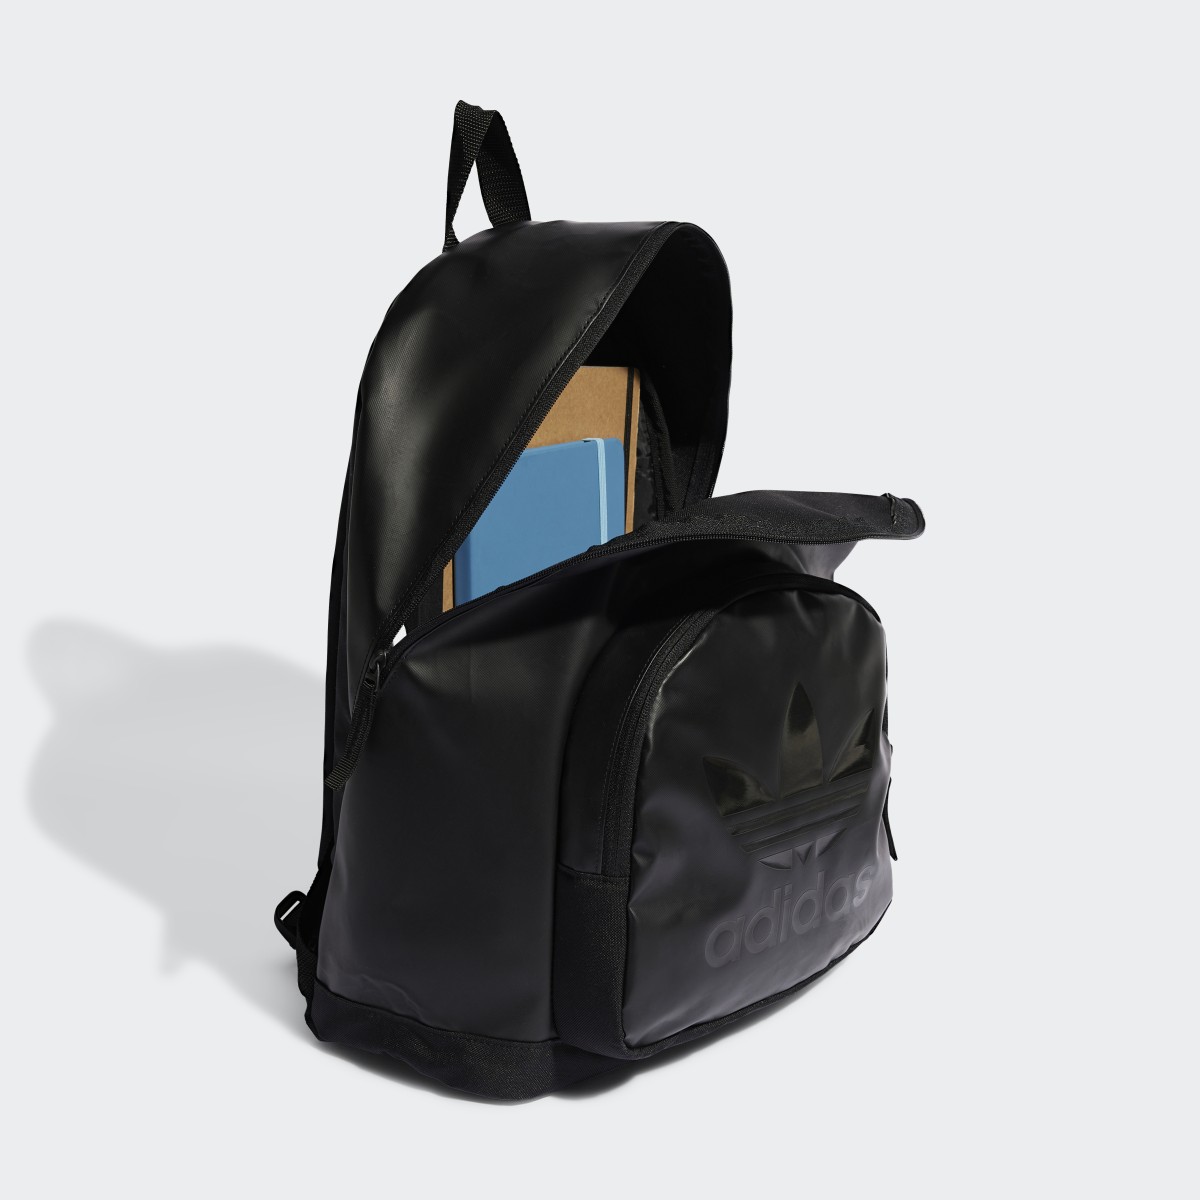 Adidas Adicolor Archive Backpack. 5